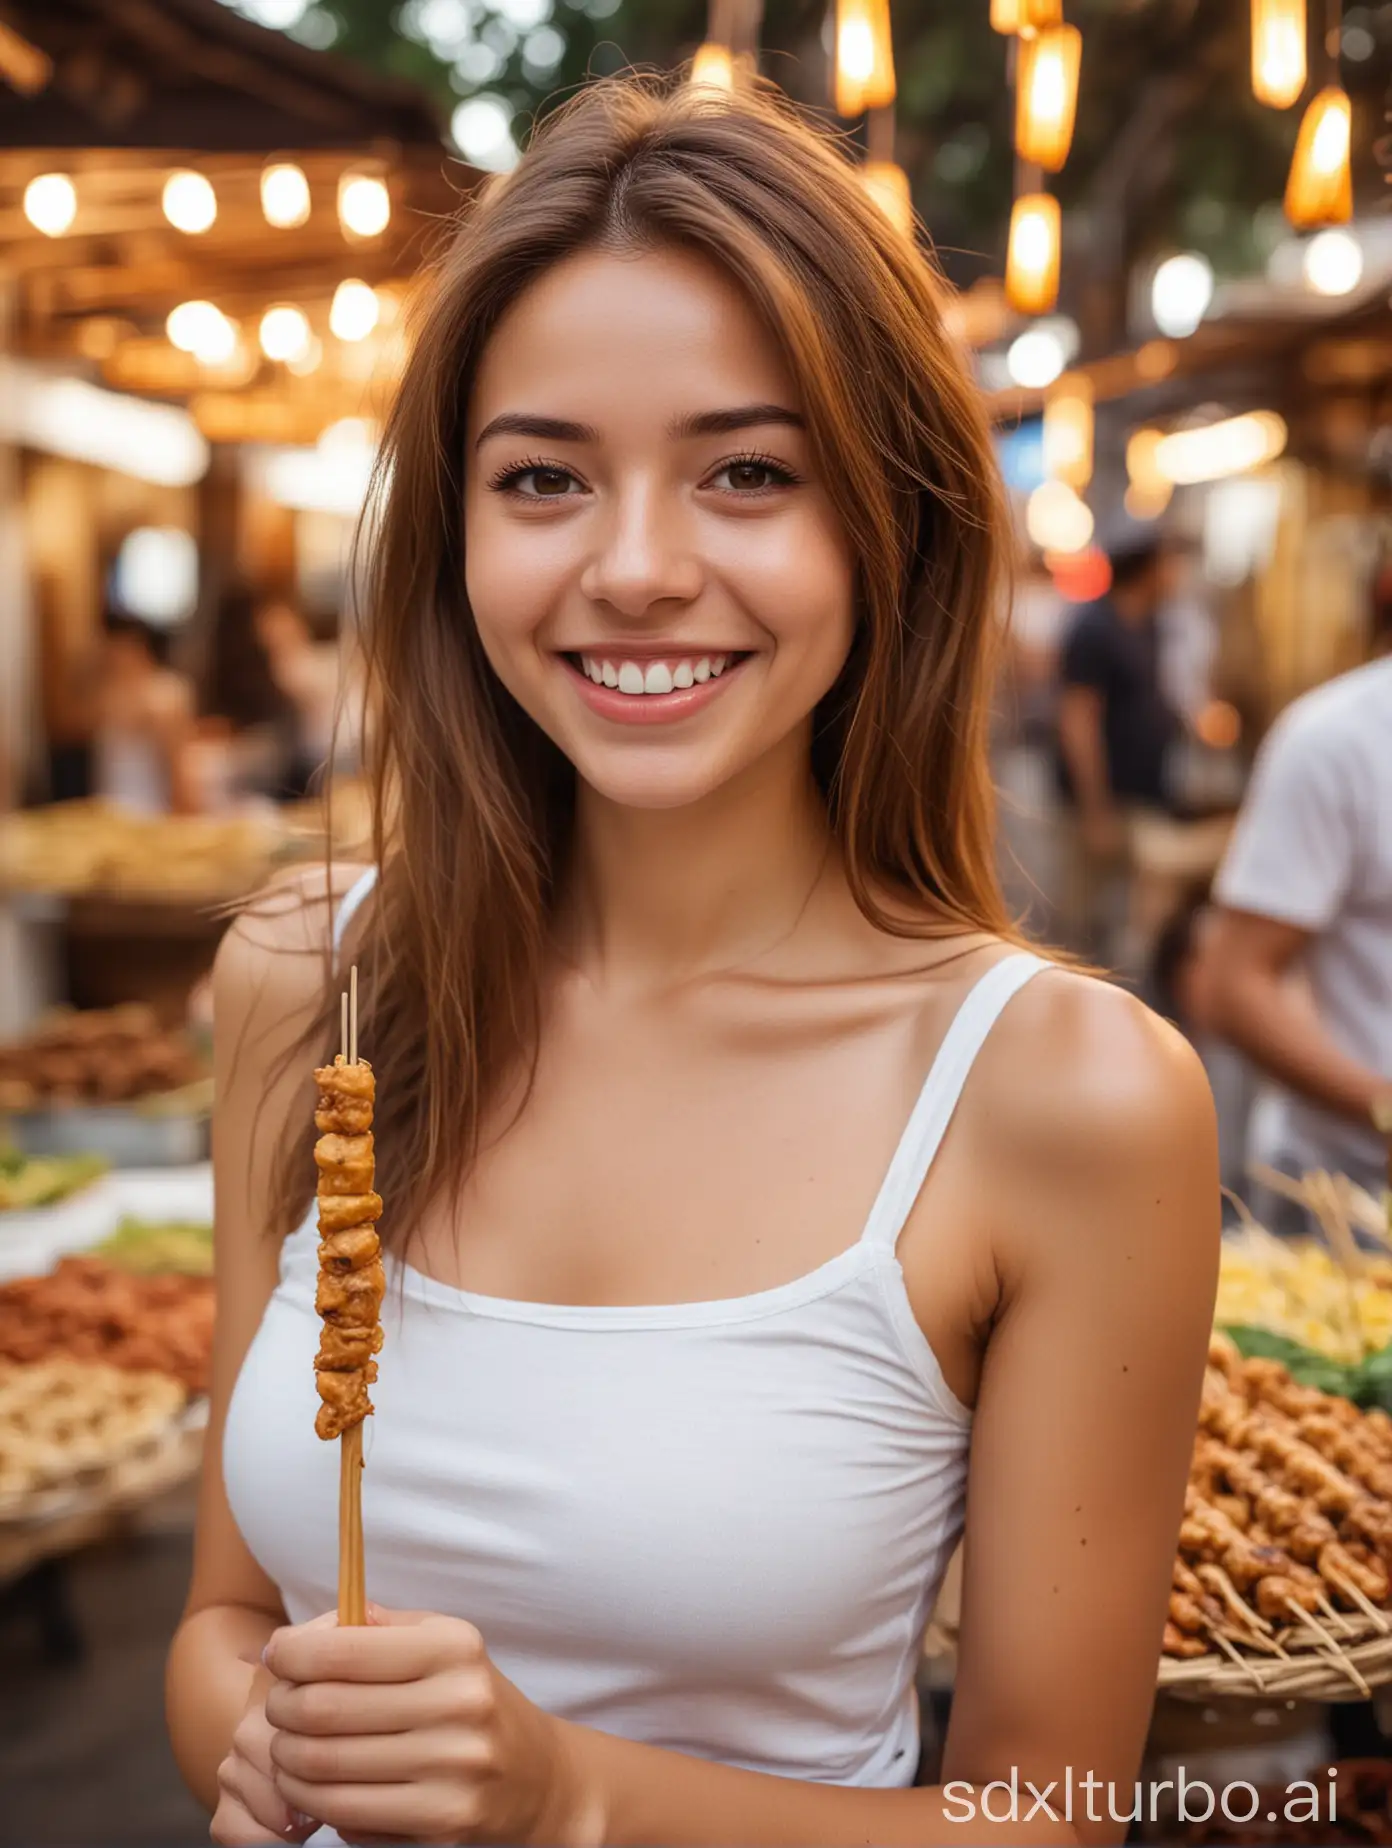 Smiling-Young-Woman-with-Satay-Stick-at-Market